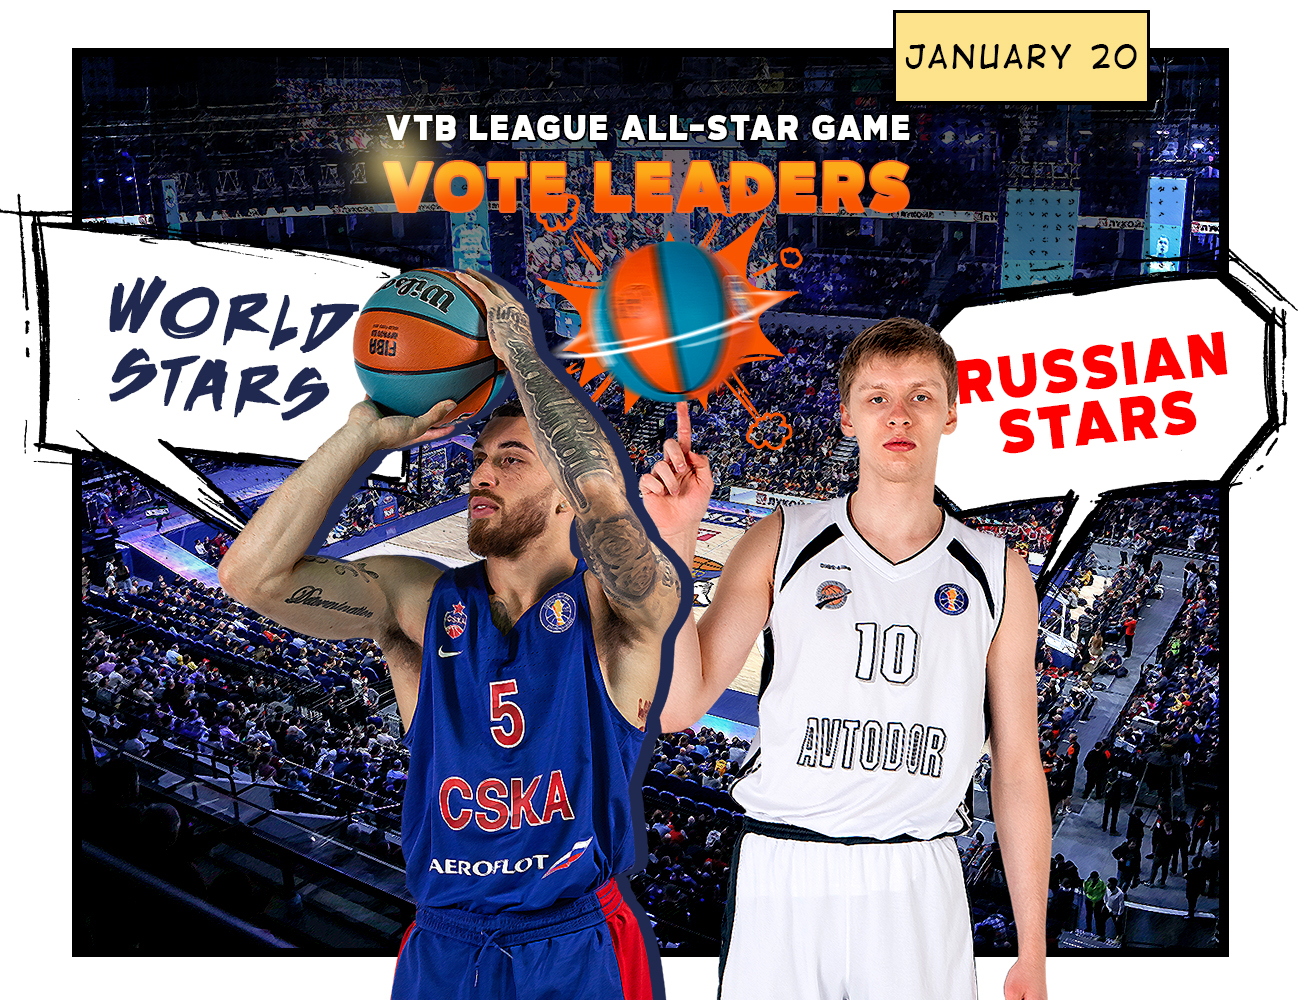 The fans choose. Nikita Mikhailovskii and Mike James lead the All-Star voting